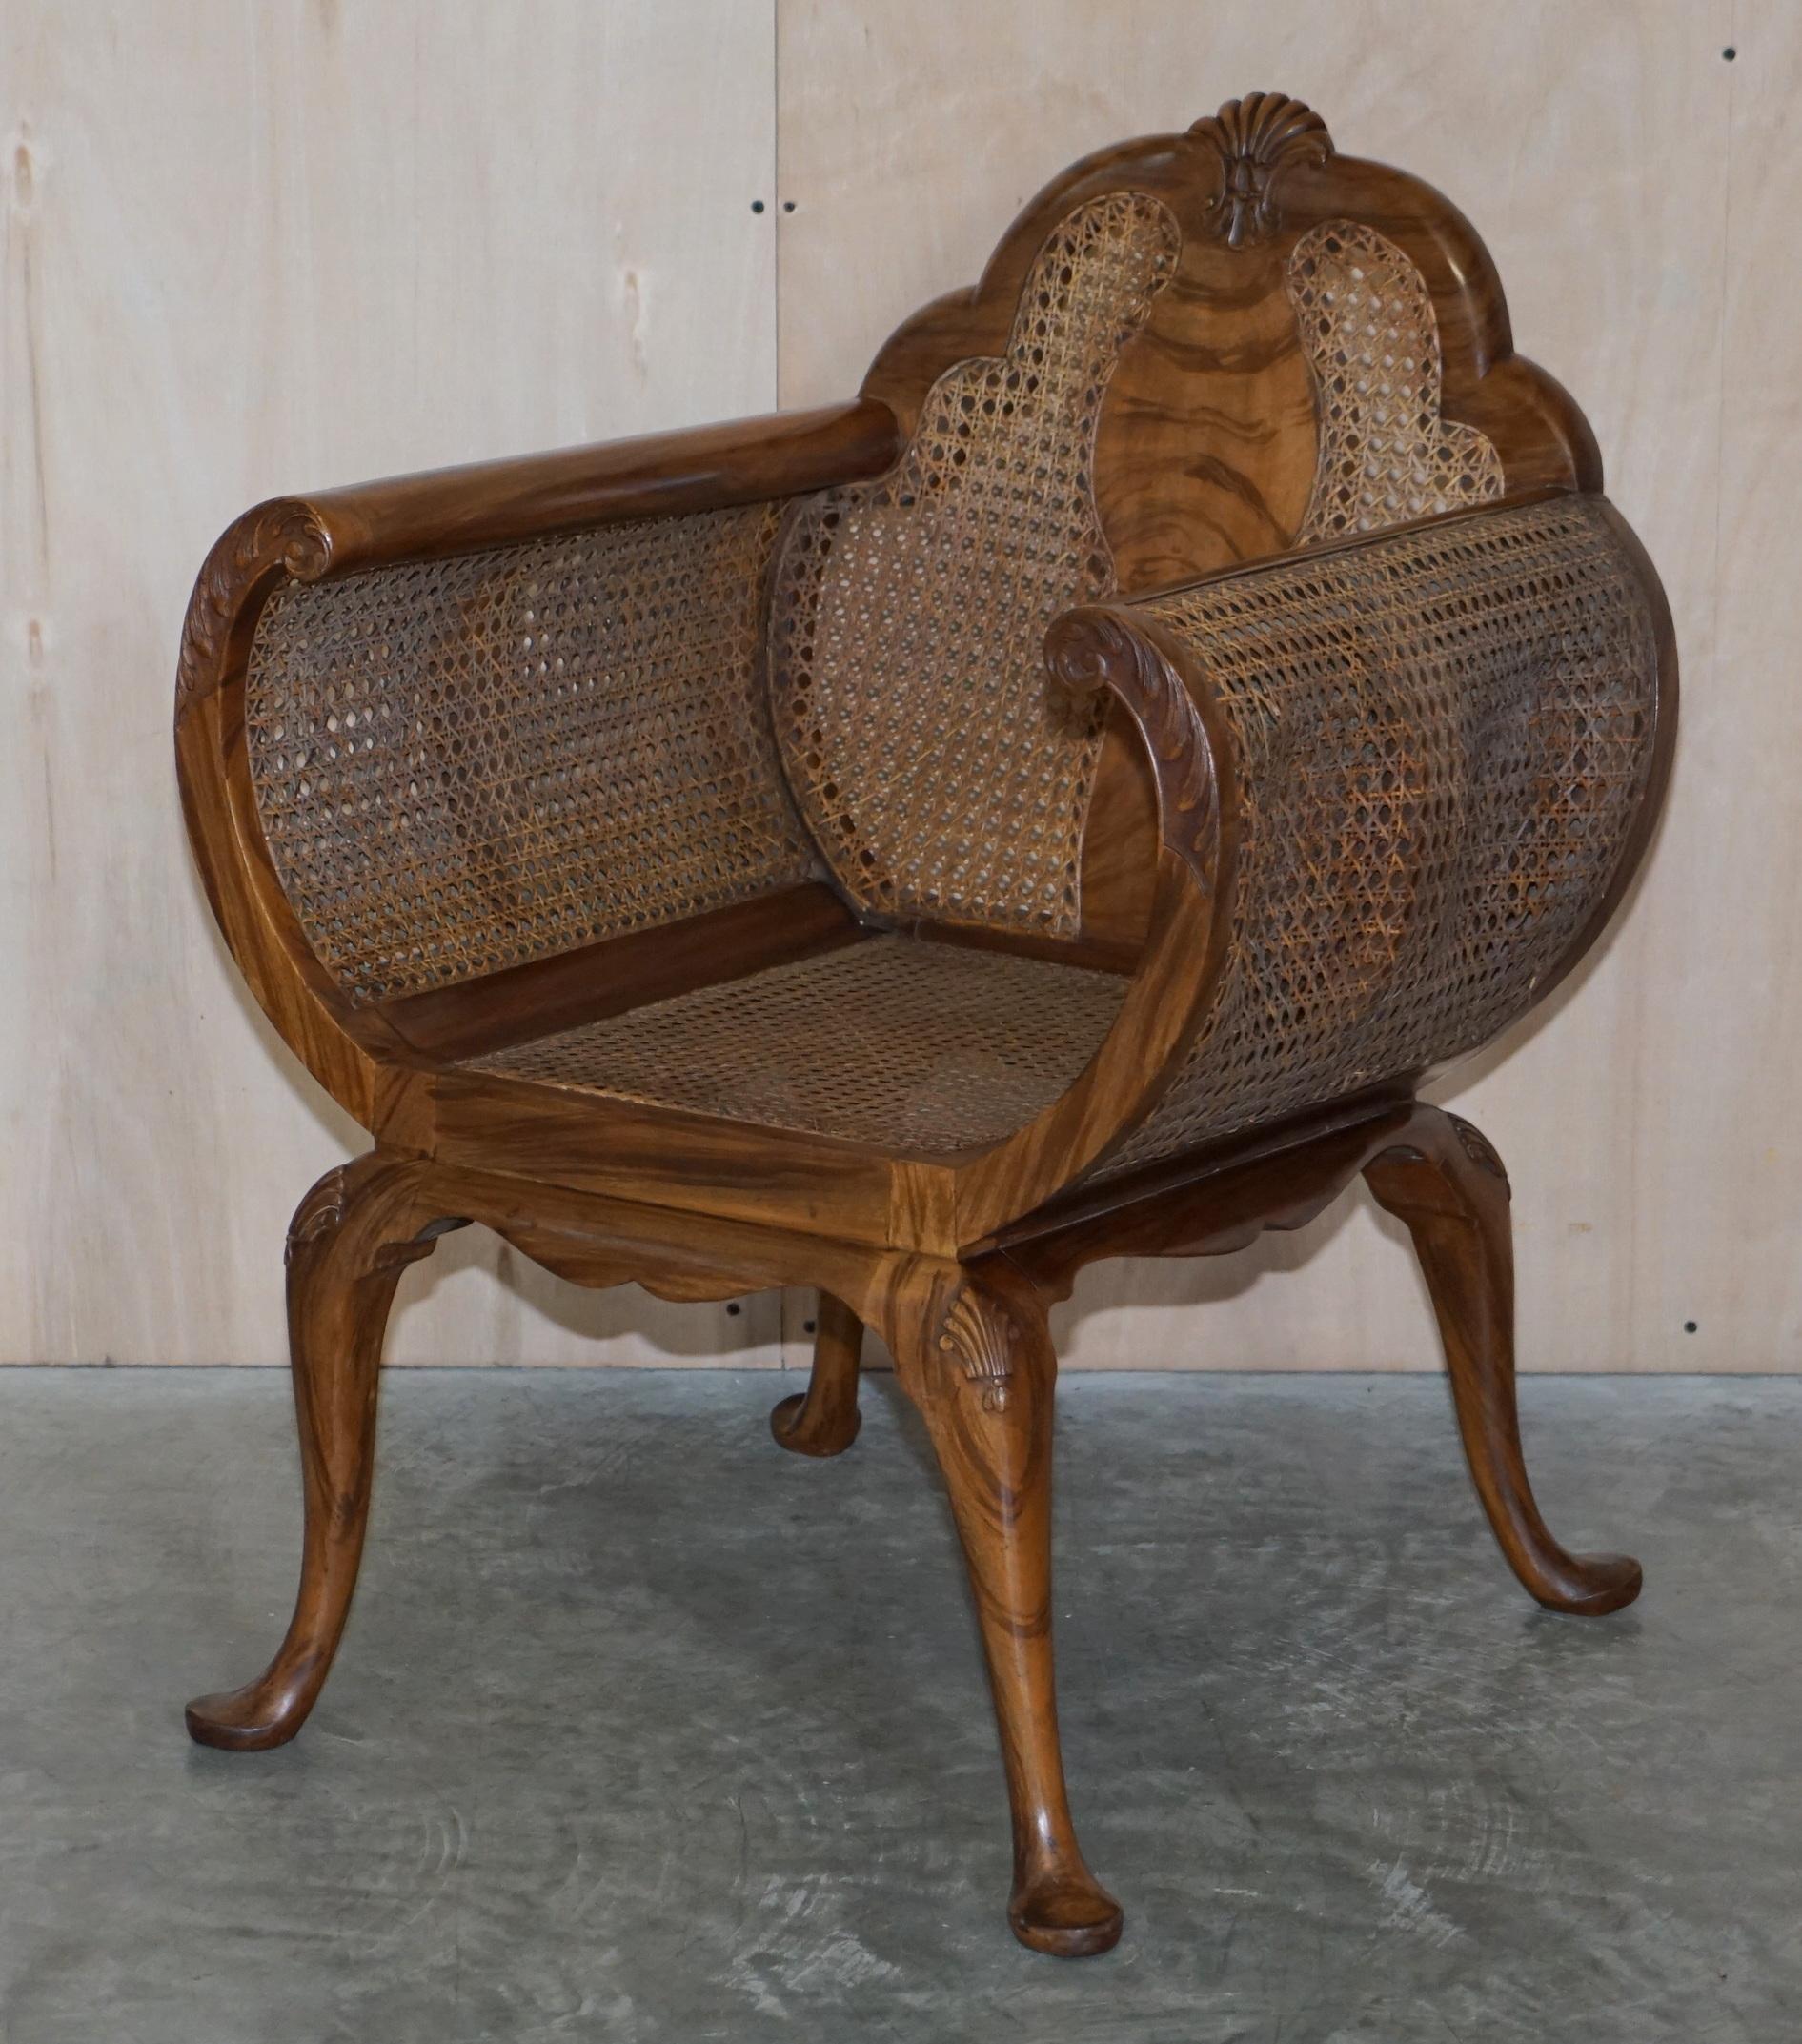 We are delighted to offer for sale this stunning pair of Art Deco Walnut, Rosewood and Bergère curved occasional armchairs

Each piece has beautifully sculpted curved arms with nice carvings on, the seat cushions are over stuffed feather filled,